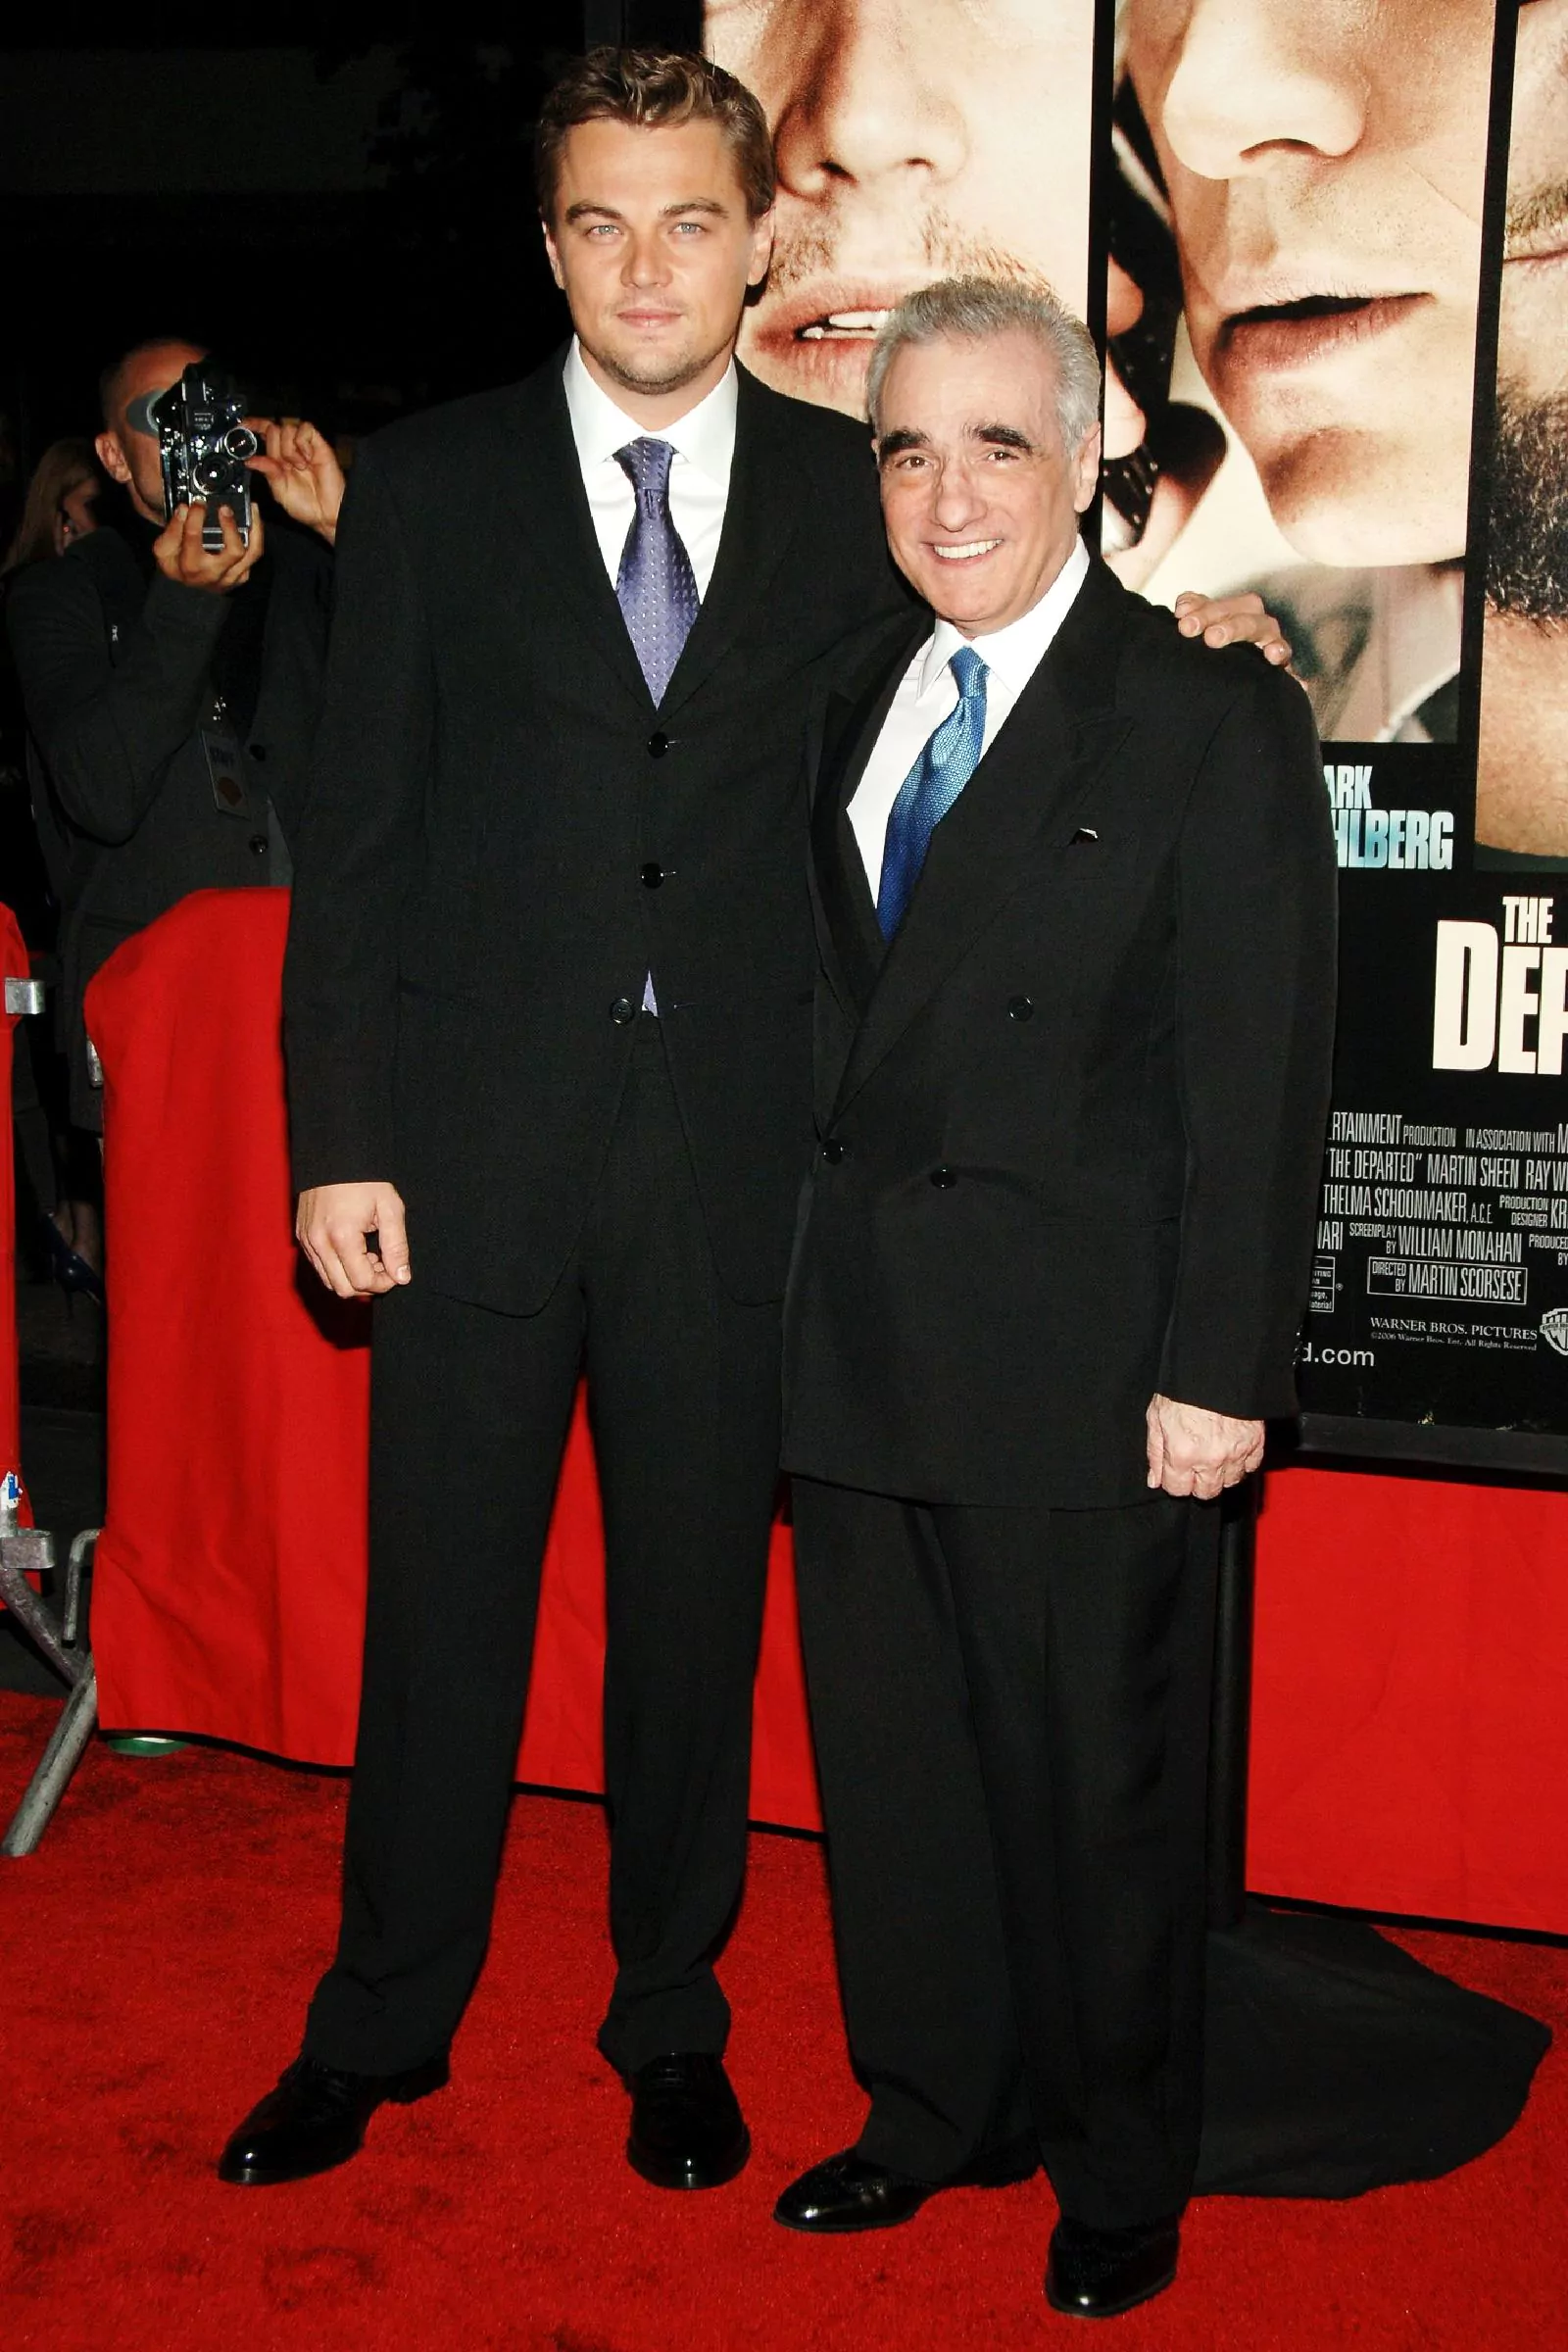 Leonardo DiCaprio and Martin Scorsese at the premiere of The Departed in New York, September 26, 2006.